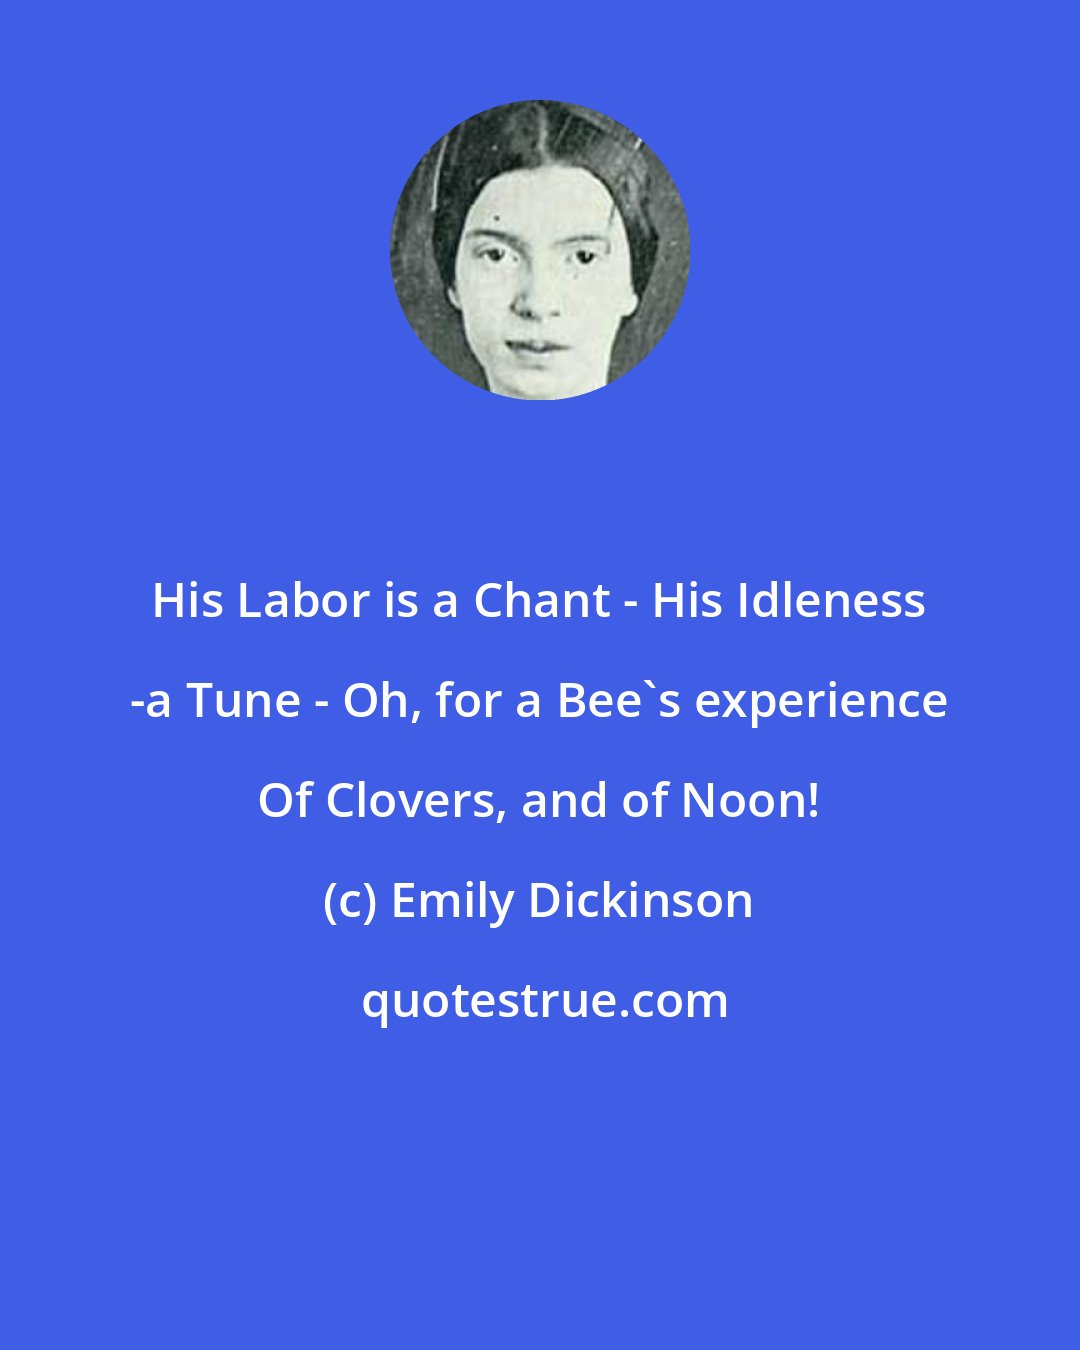 Emily Dickinson: His Labor is a Chant - His Idleness -a Tune - Oh, for a Bee's experience Of Clovers, and of Noon!